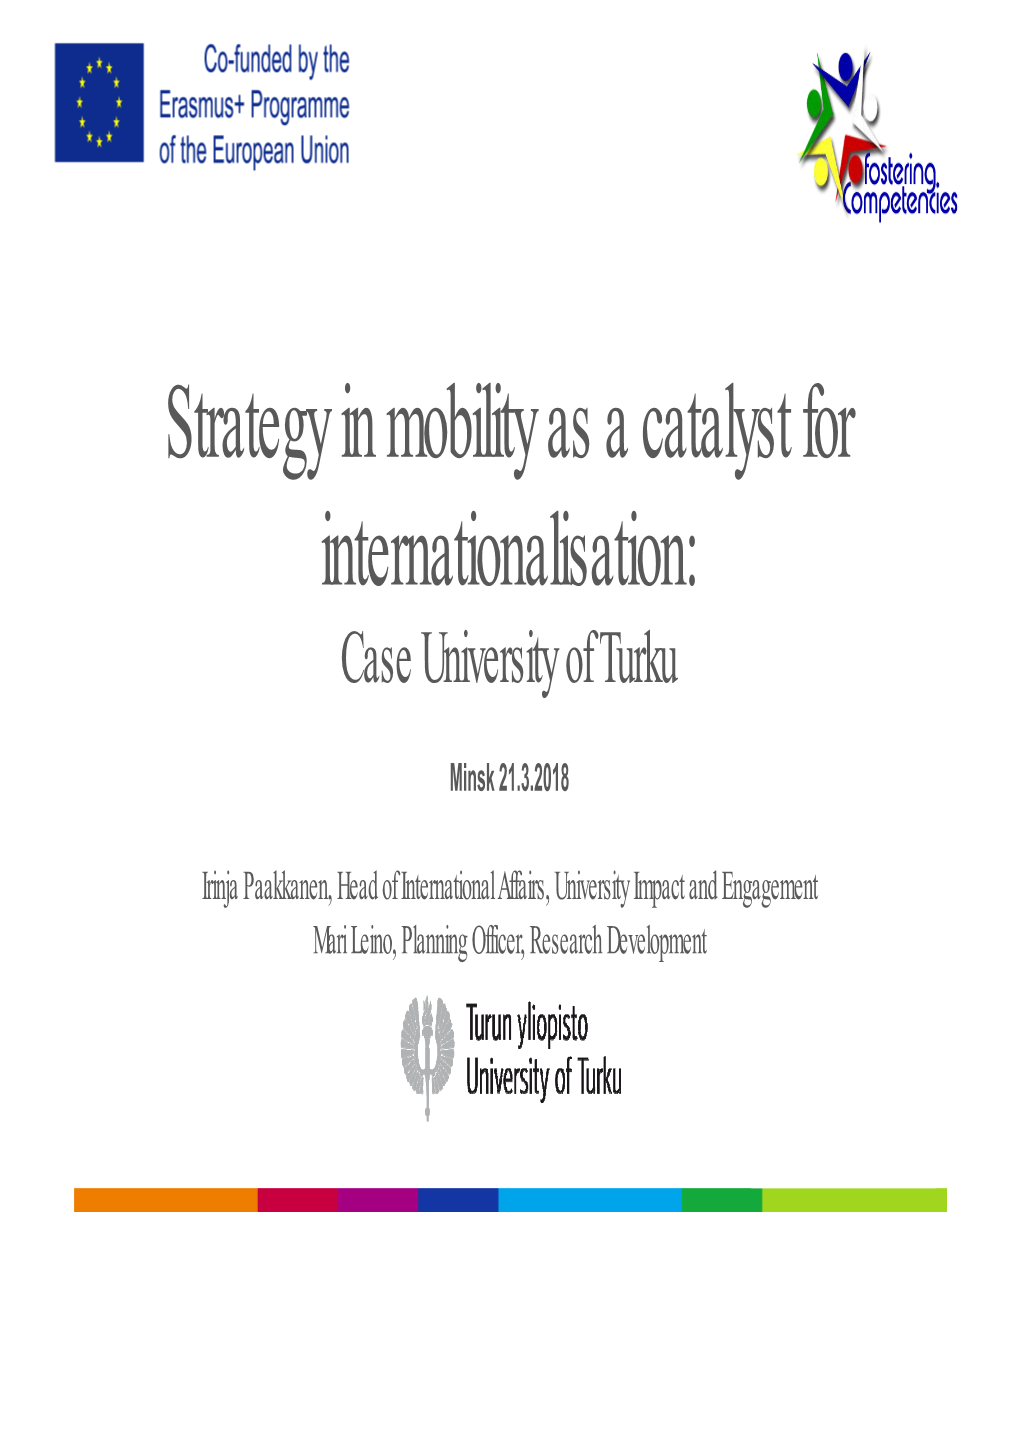 Strategy in Mobility As a Catalyst for Internationalisation: Case University of Turku